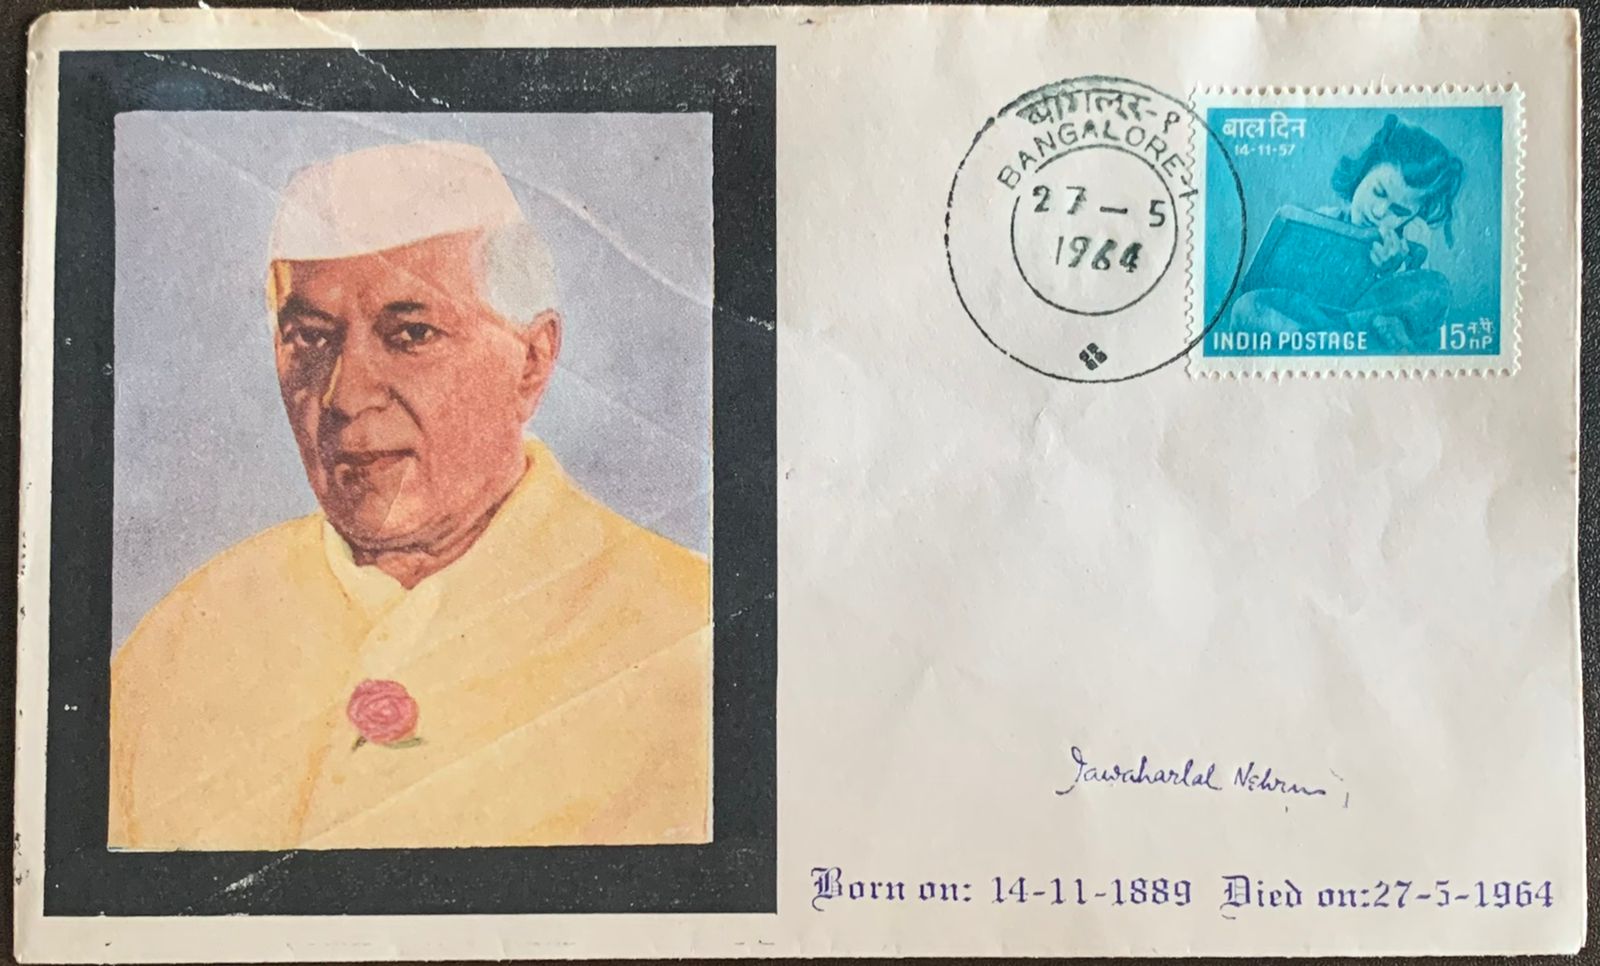 India 1964 Jawahar Lal Nehru Mourning Cover Cancelled on Death Date